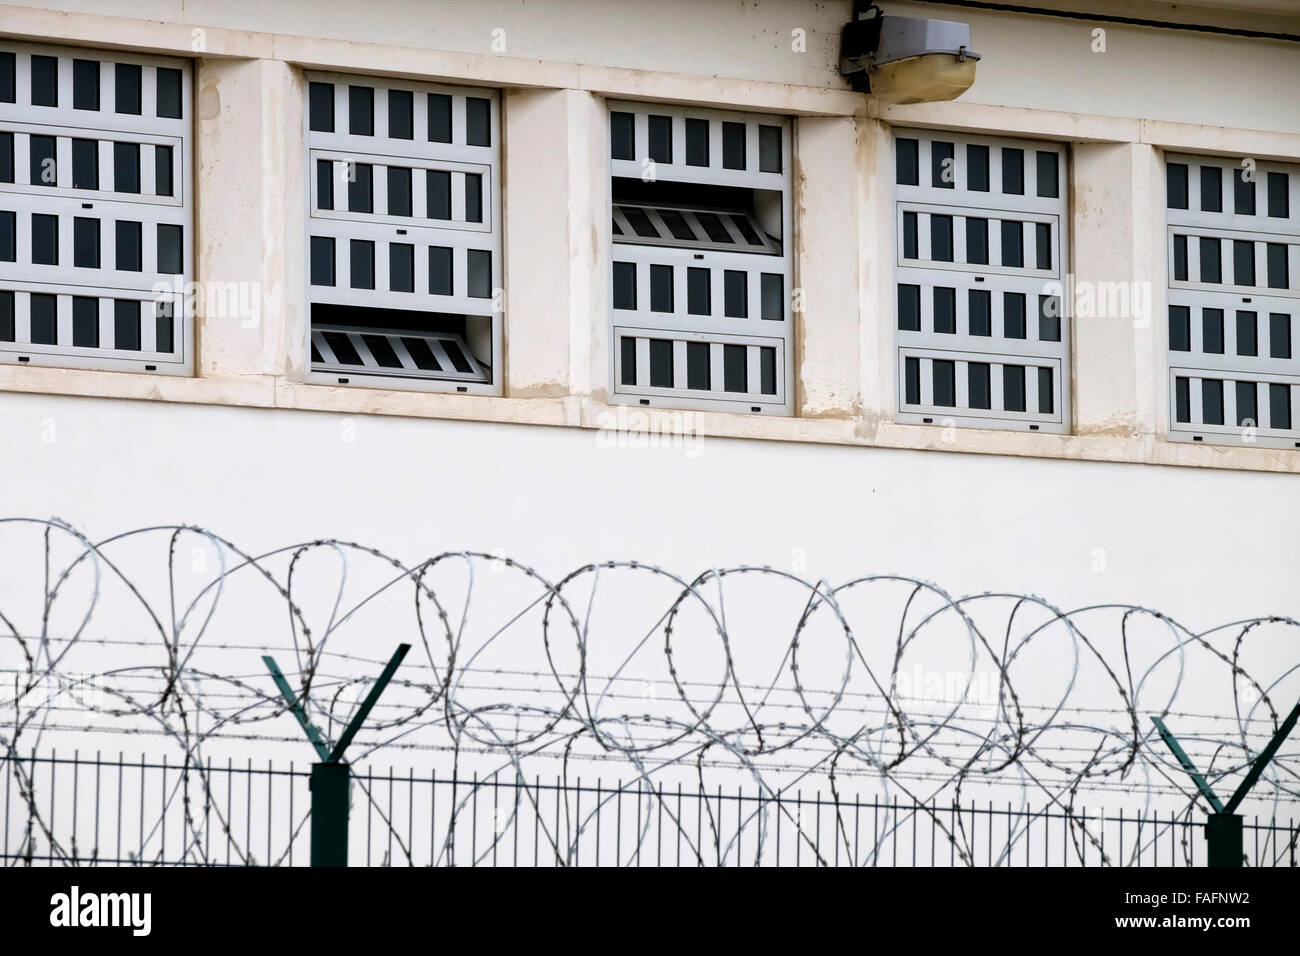 Prison walls with barbwire Stock Photo